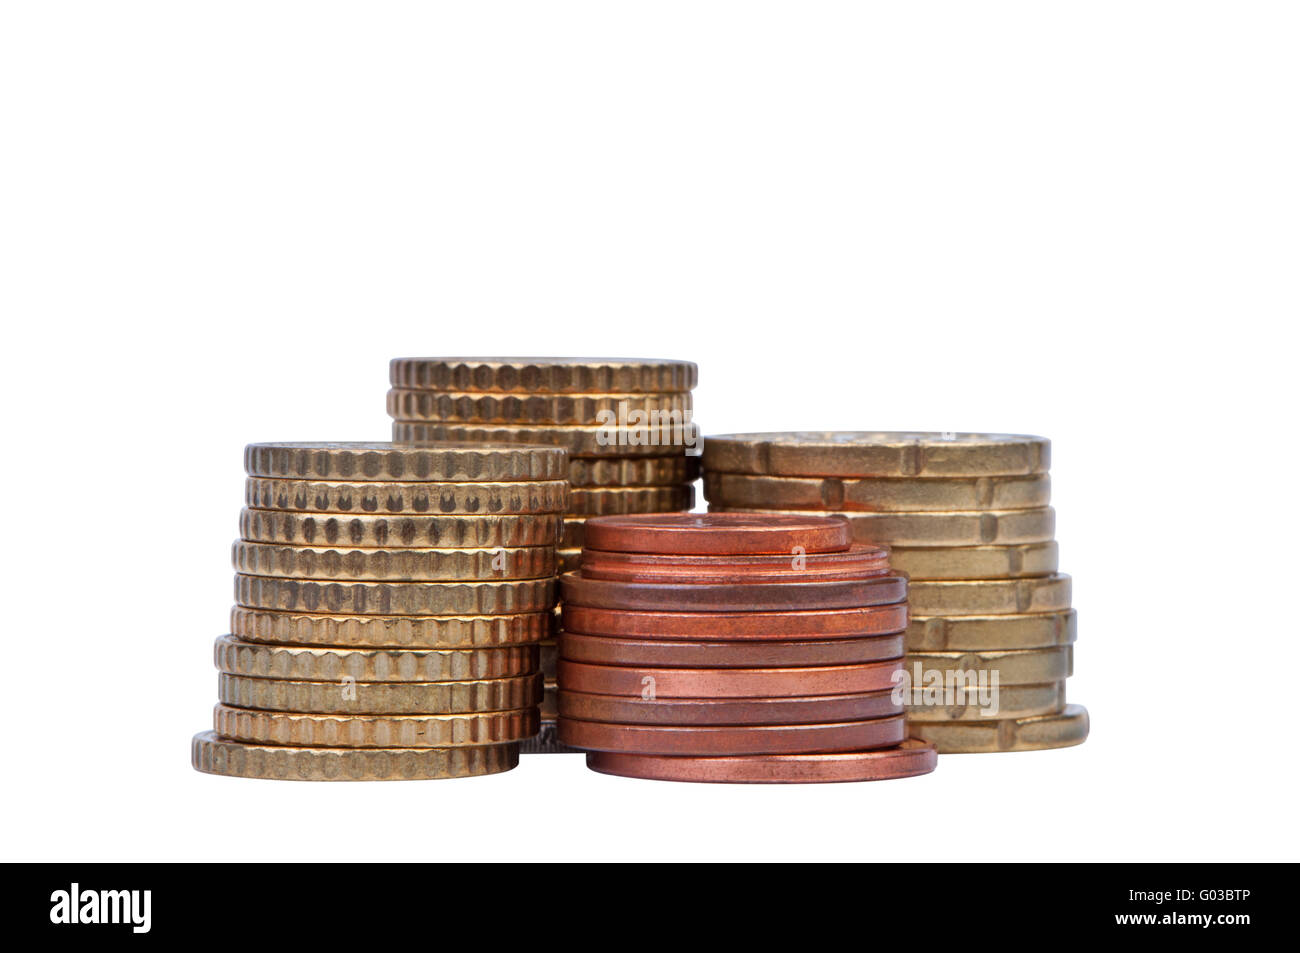 Stacks of coins isolated on white background. Stock Photo